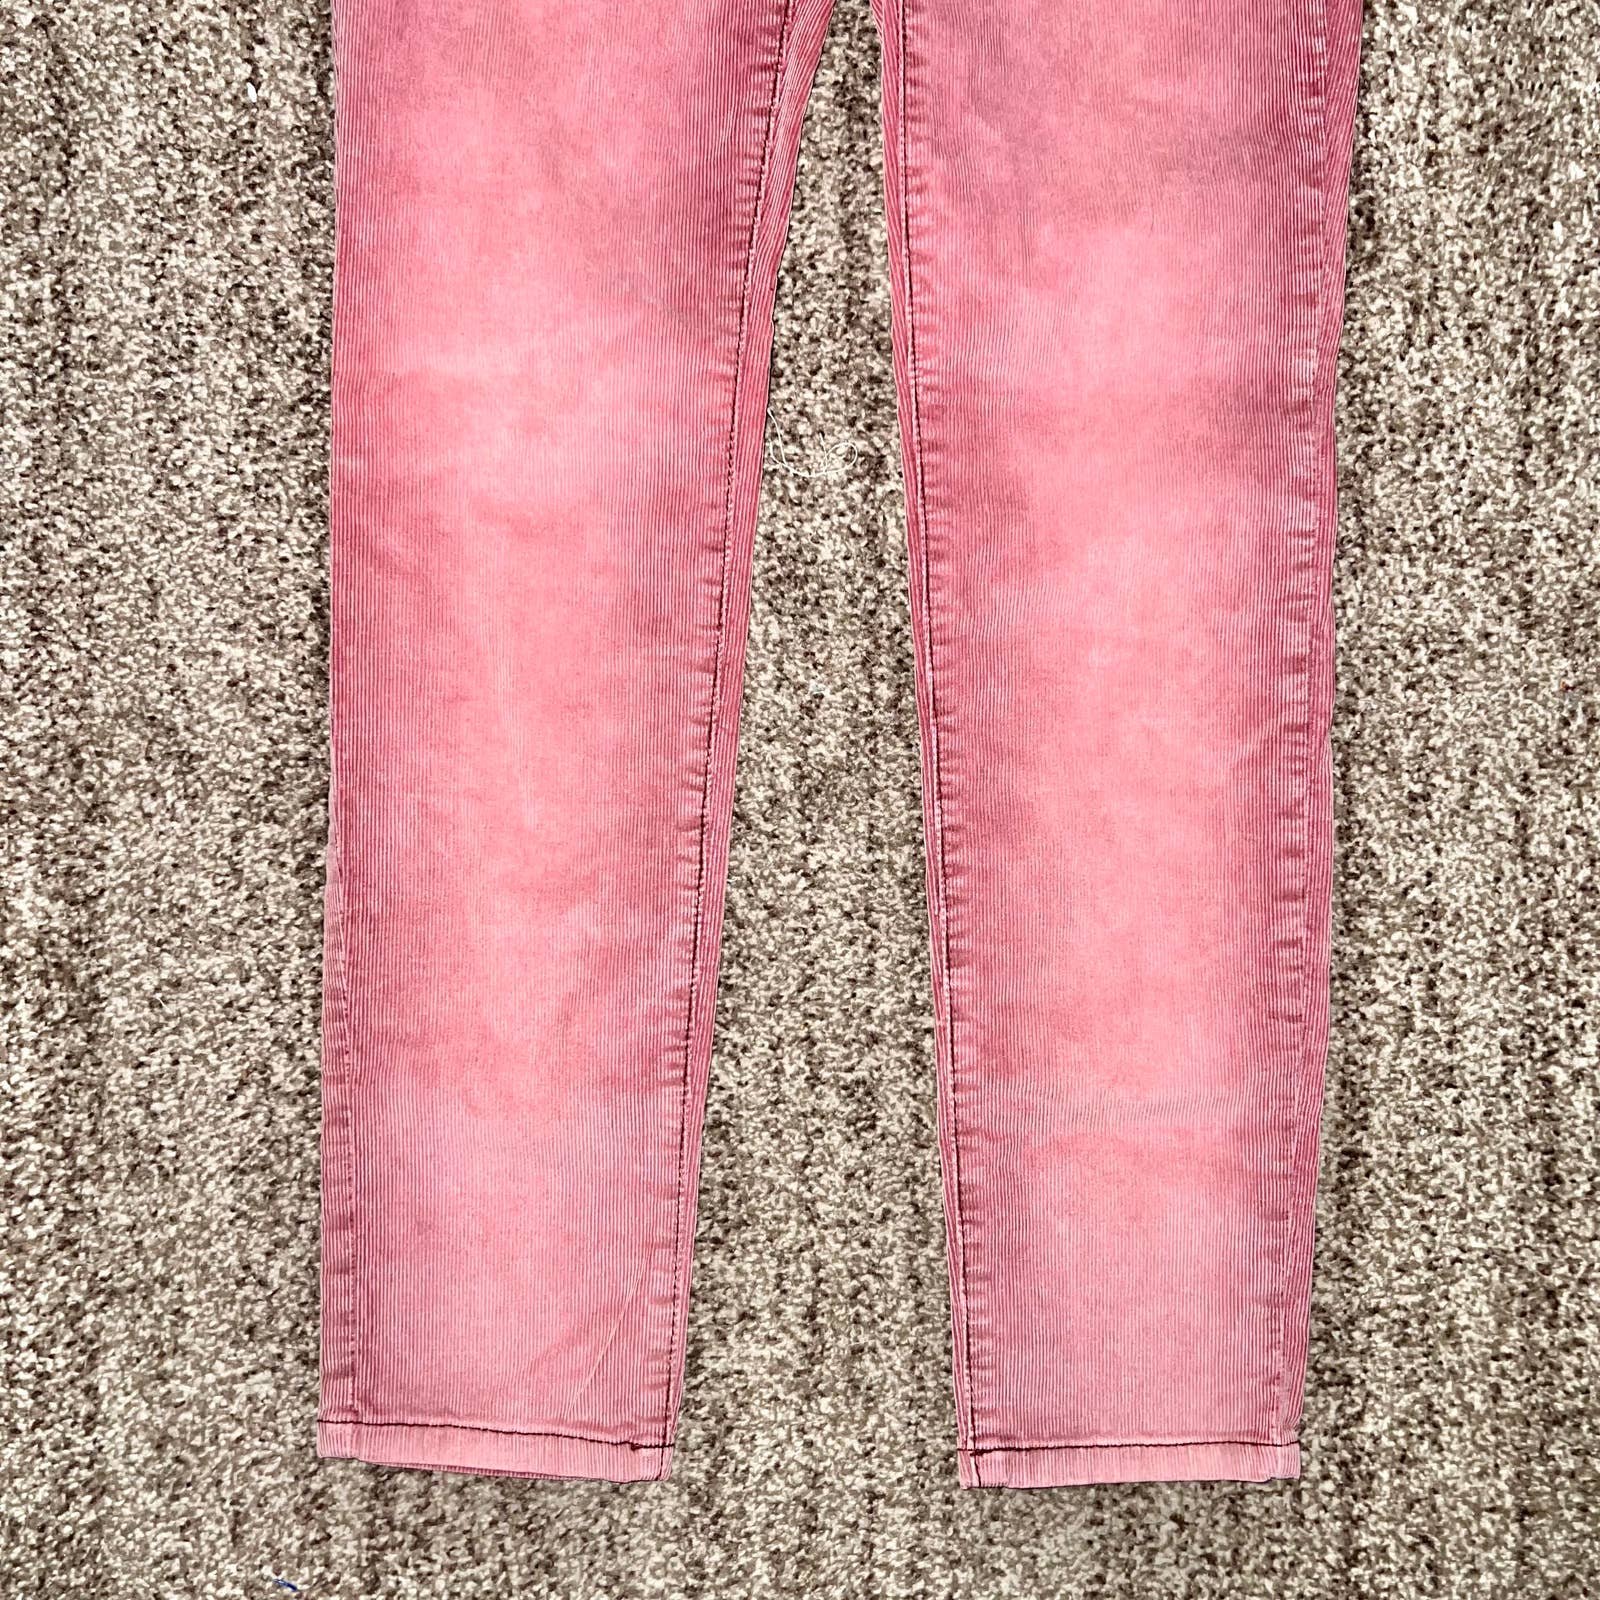 Amazing Free People Women´s Cord Roller Skinny Size 25 Washed Red Jeans mnuX5jwxR Low Price